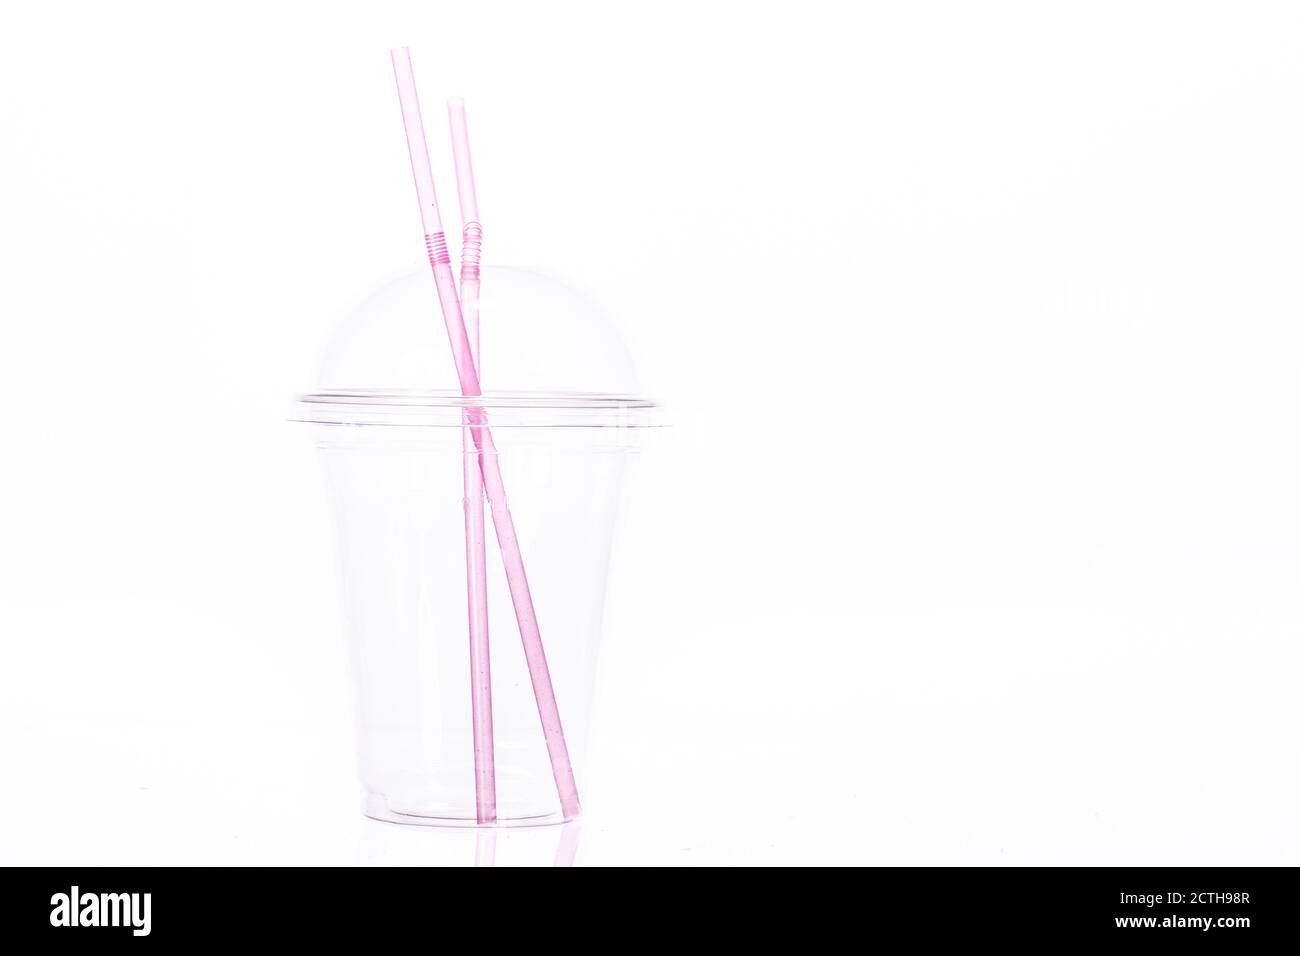 https://c8.alamy.com/comp/2CTH98R/clear-empty-plastic-cup-with-dome-lid-and-two-pink-plastic-straws-for-milkshake-2CTH98R.jpg